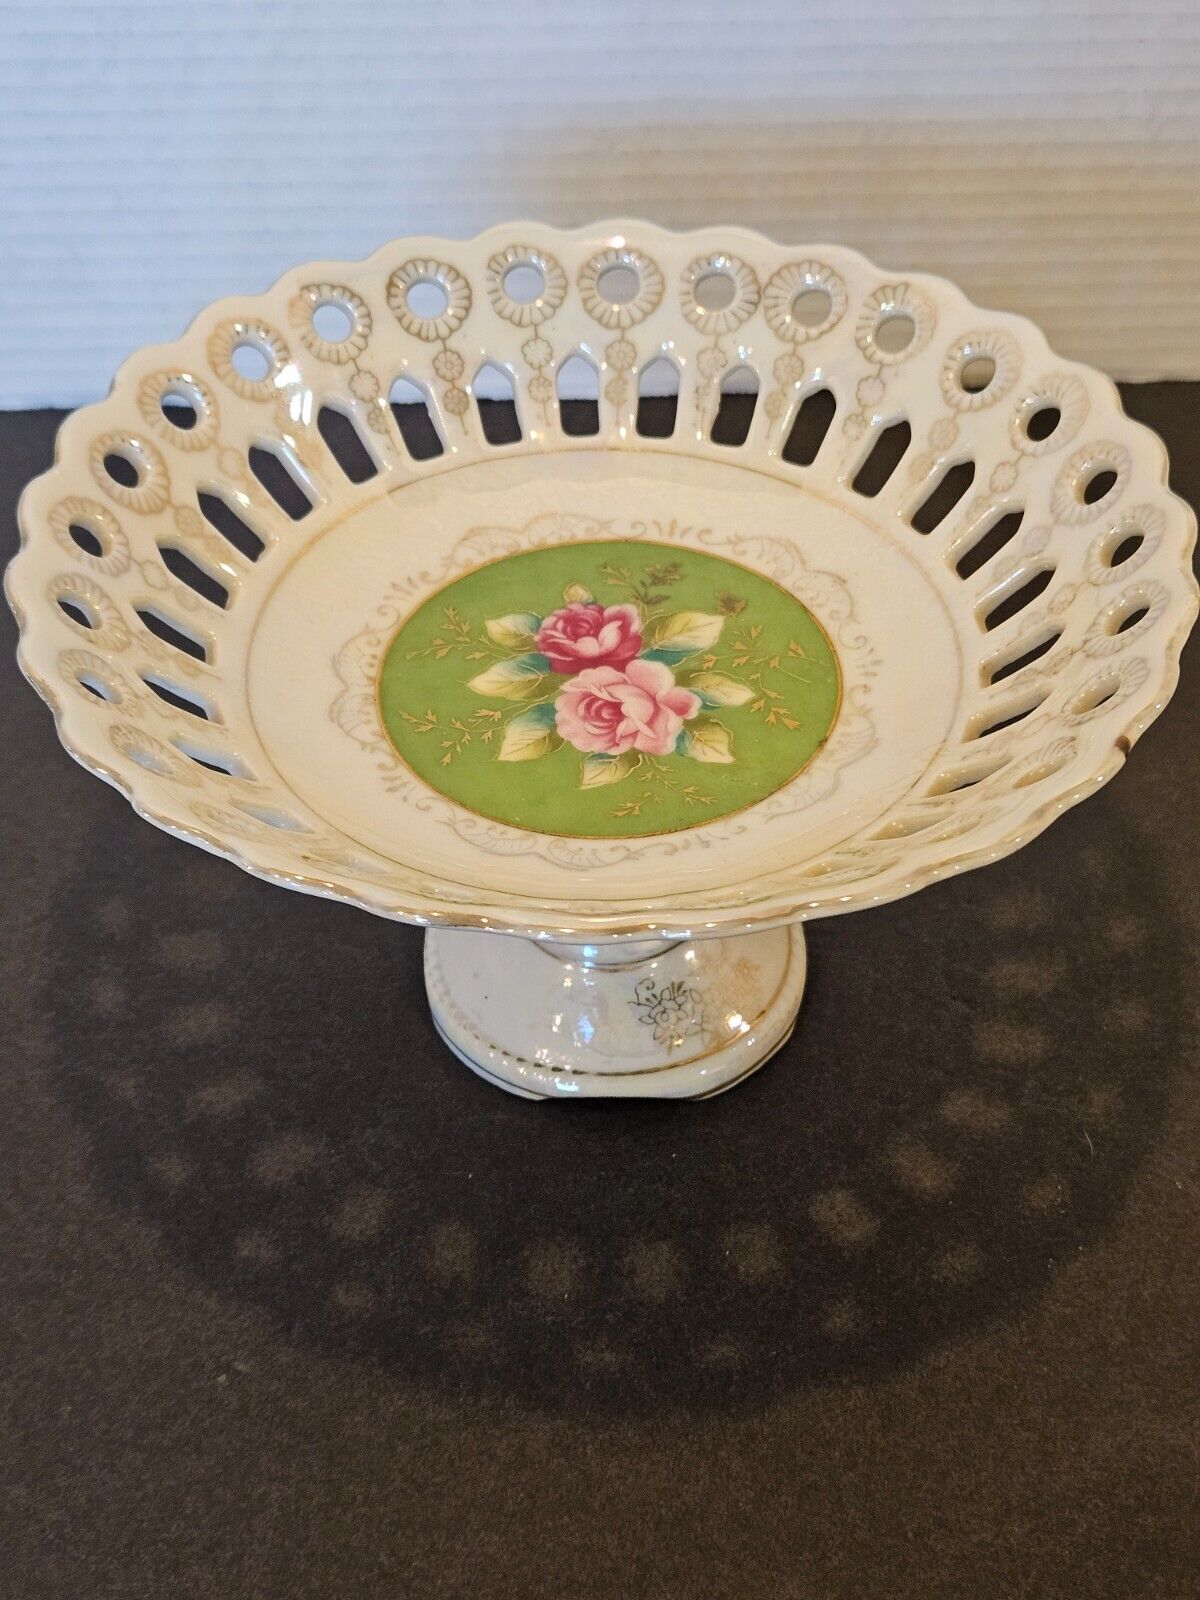 Vintage Ucagco Compote Pedestal Lace Bowl W/Gold Trim Green W/Pink Roses